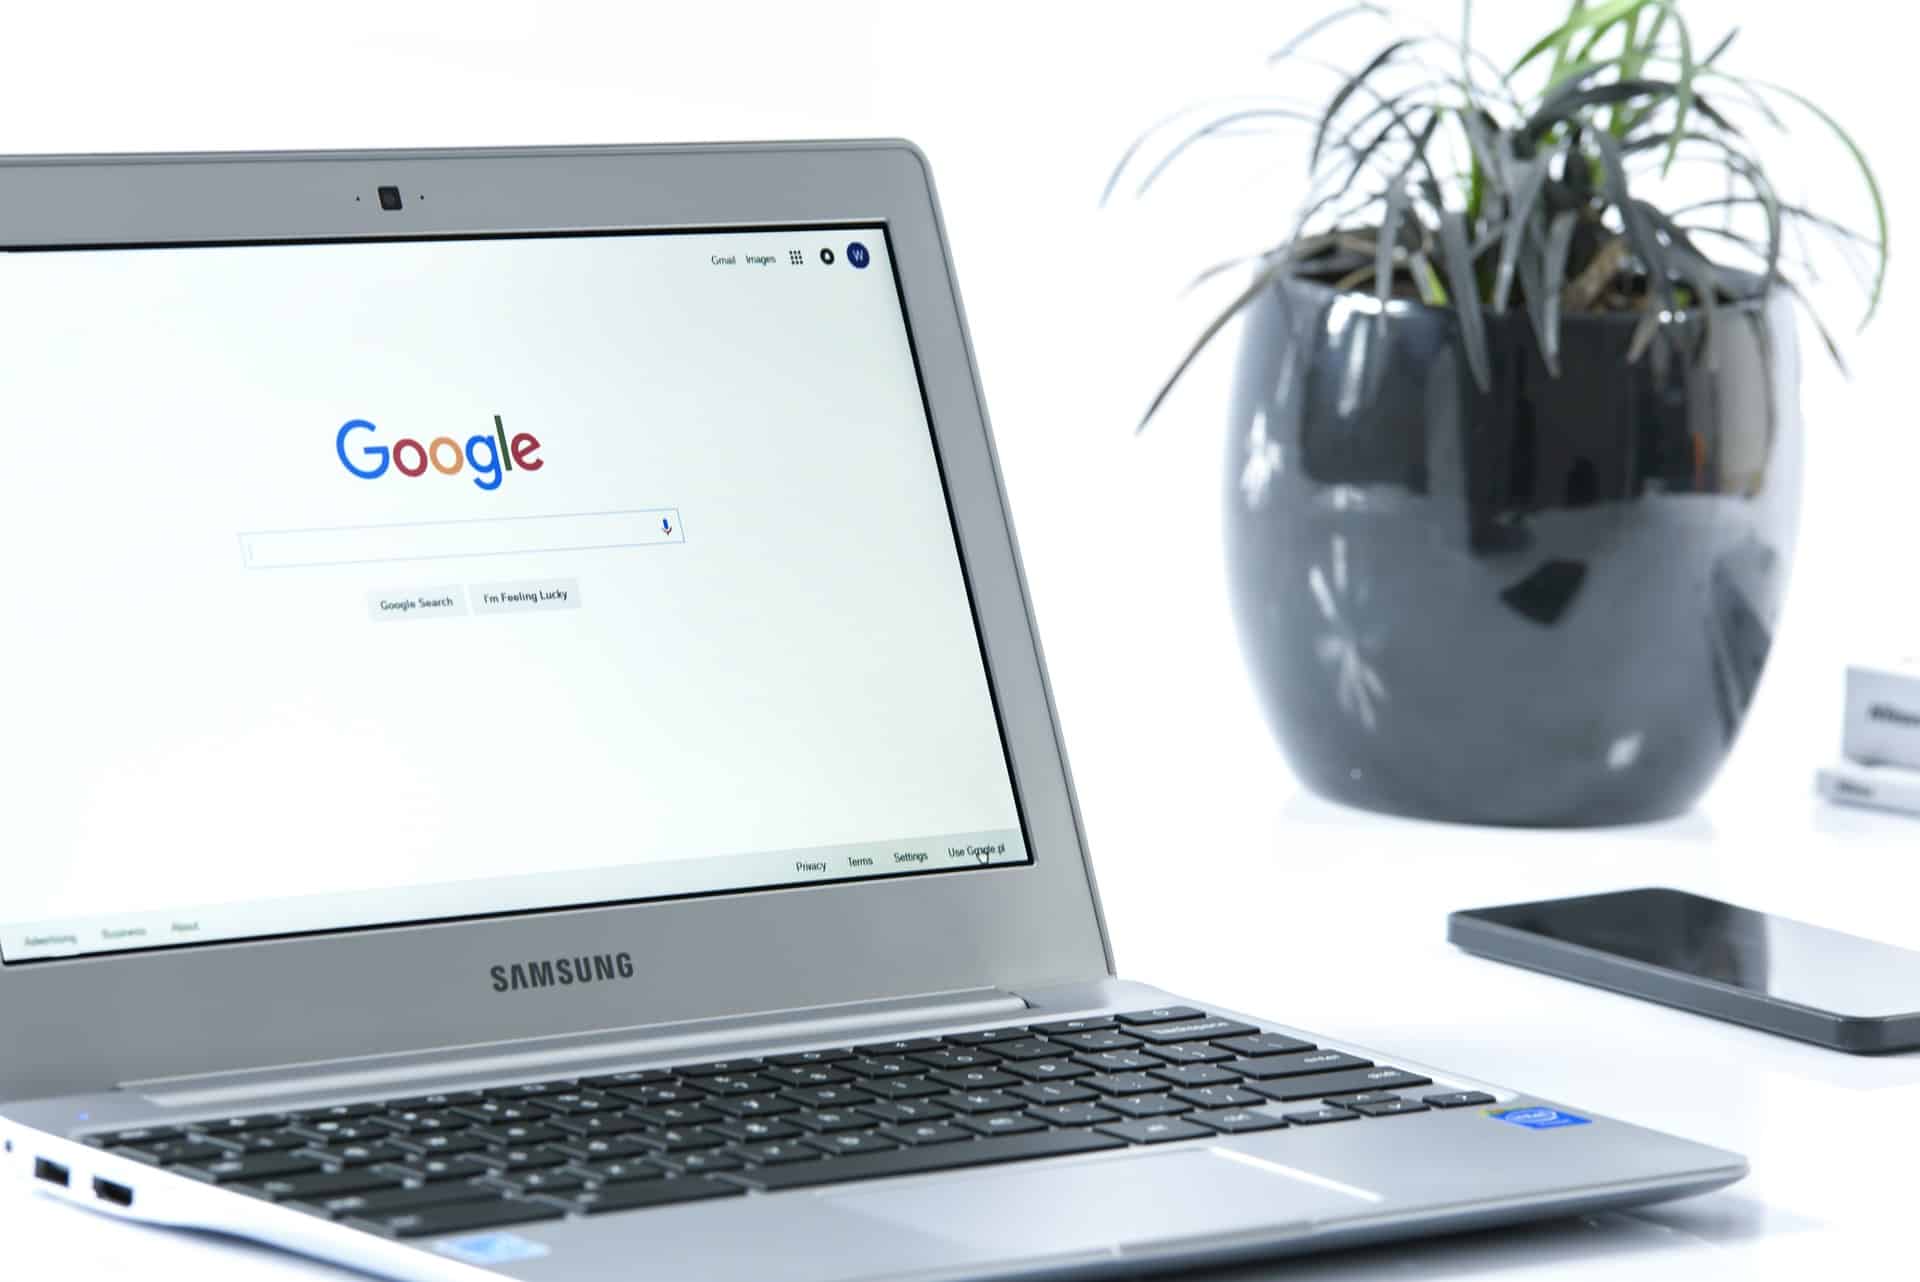 A laptop on the desk - the opened screen shows a Google search box. Example of SEO keyword research.